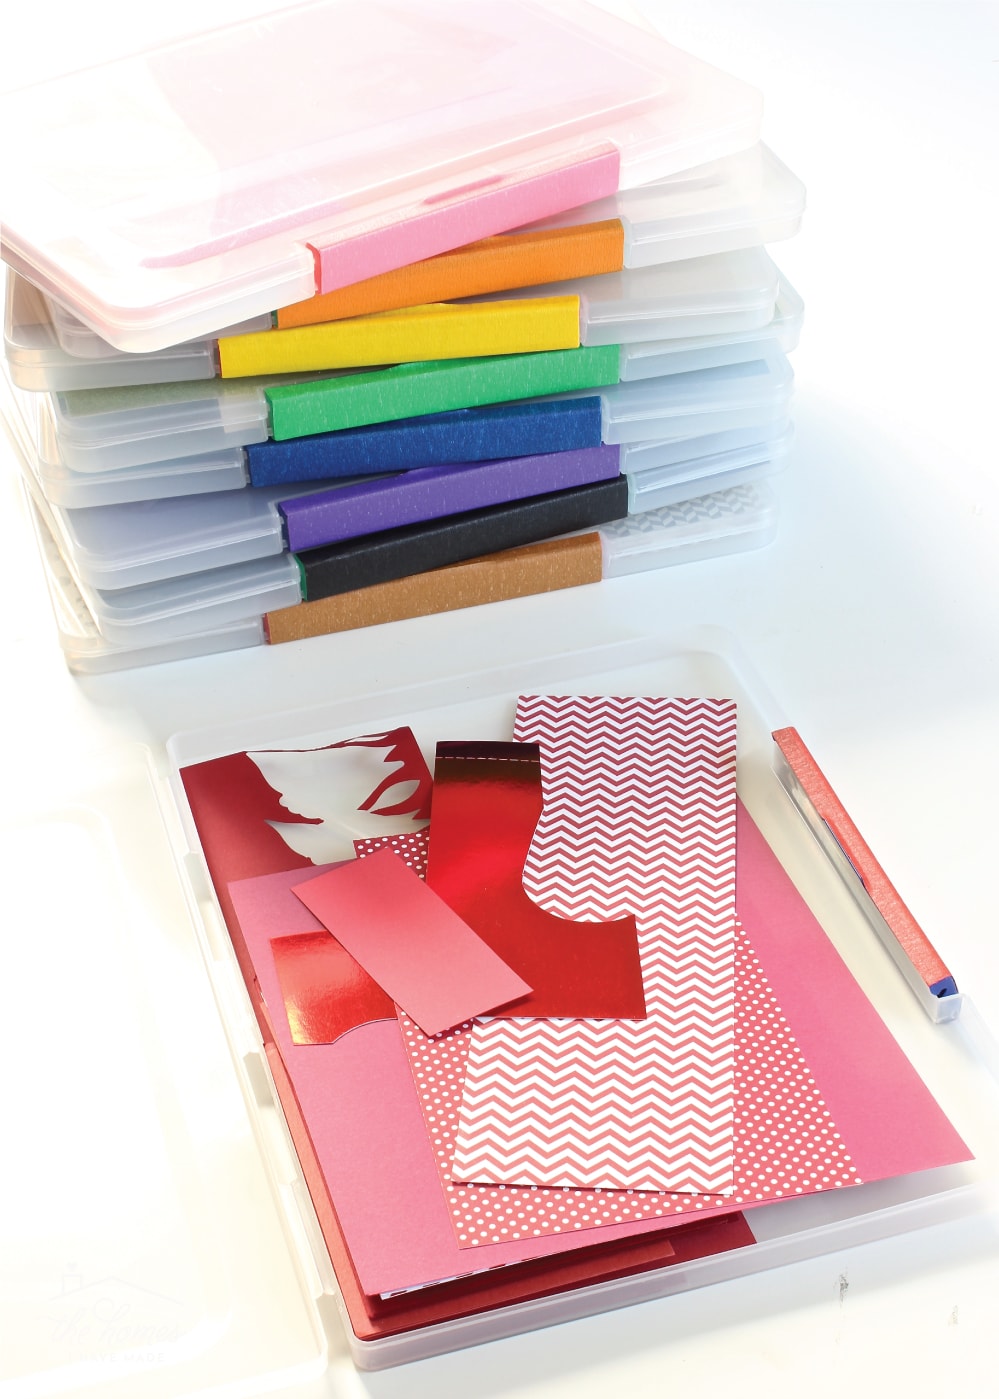 Sharing smart and simple solutions for storing all the craft papers from cardstock and pads to rolls and more!